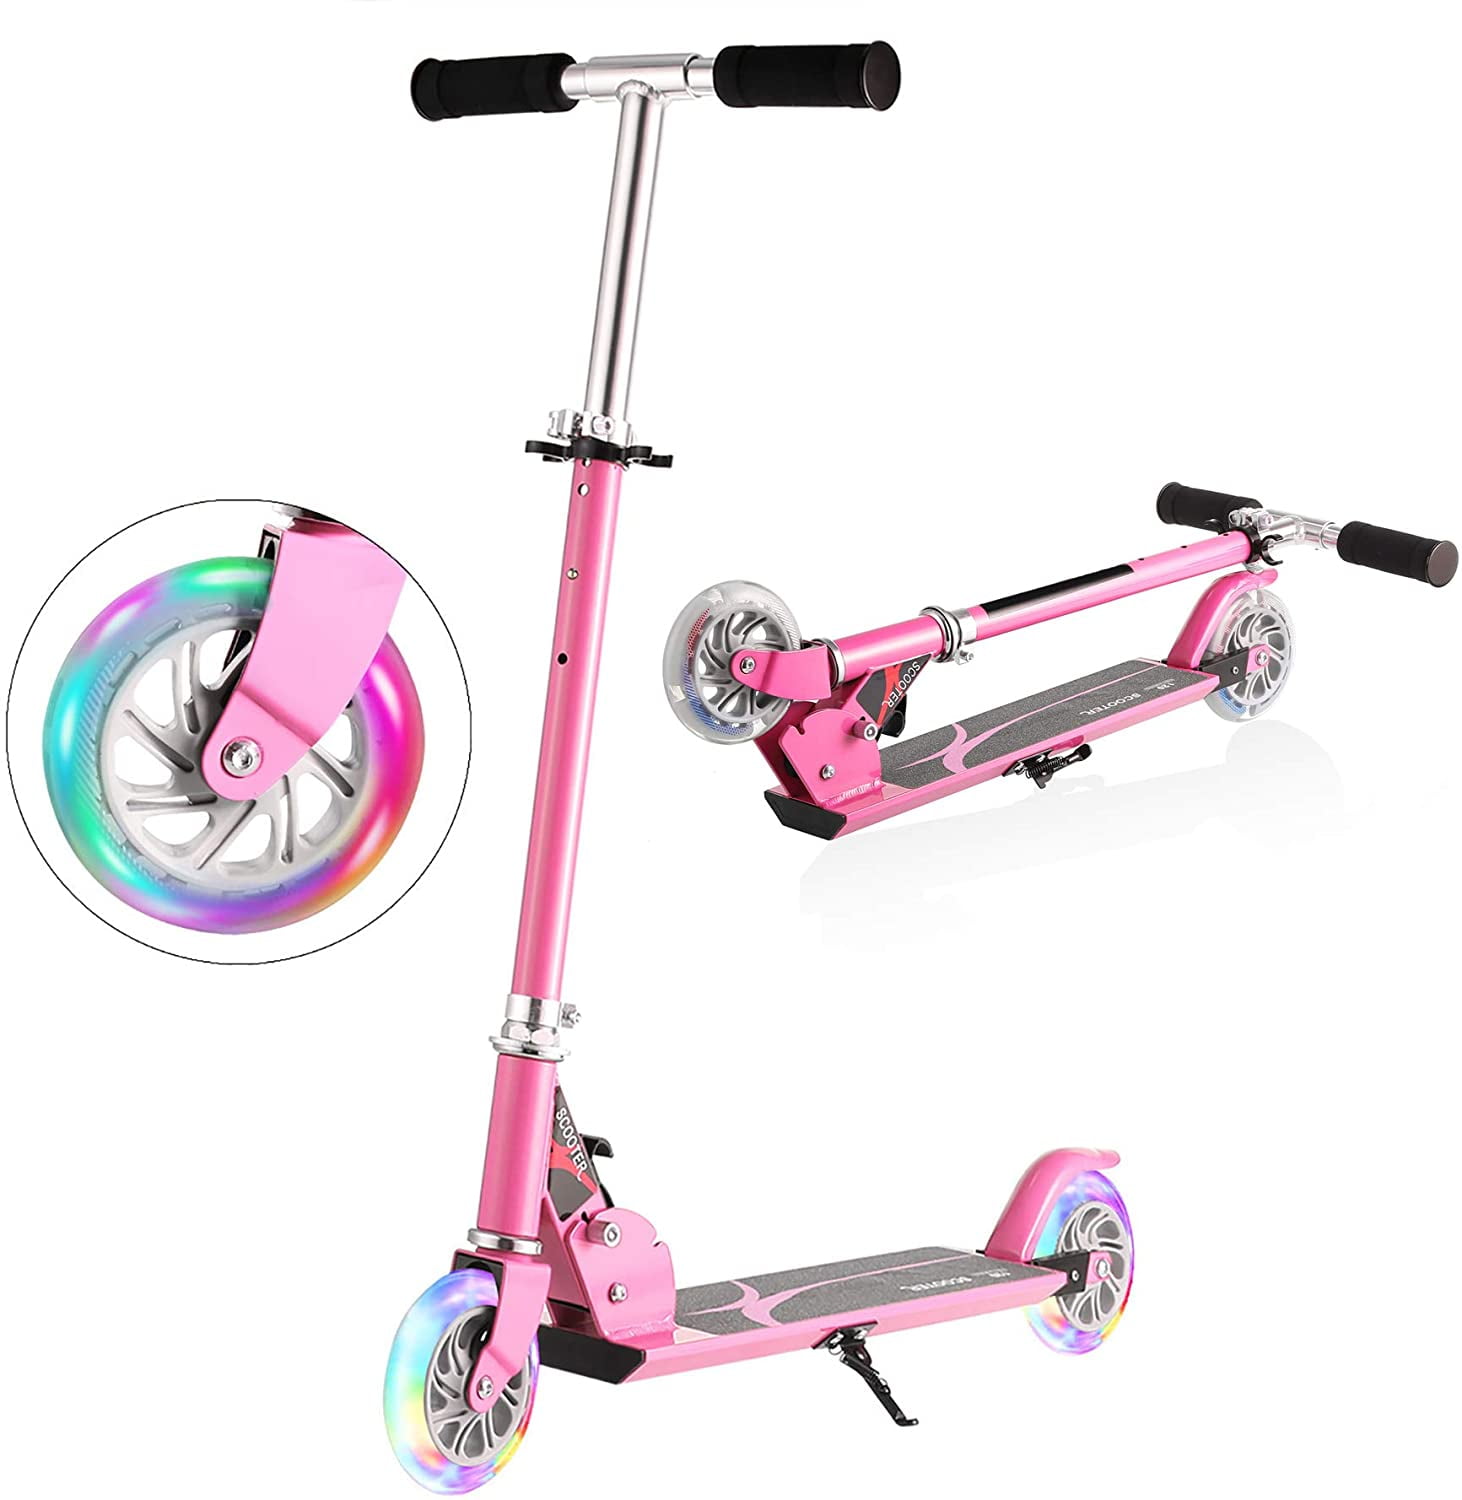 Kick Scooter for Toddlers Girls & Boys with LED Light Up Scooters Wheels Hikole Scooter for Kids Adjustable Height Scooter for Children Ages 3-12 